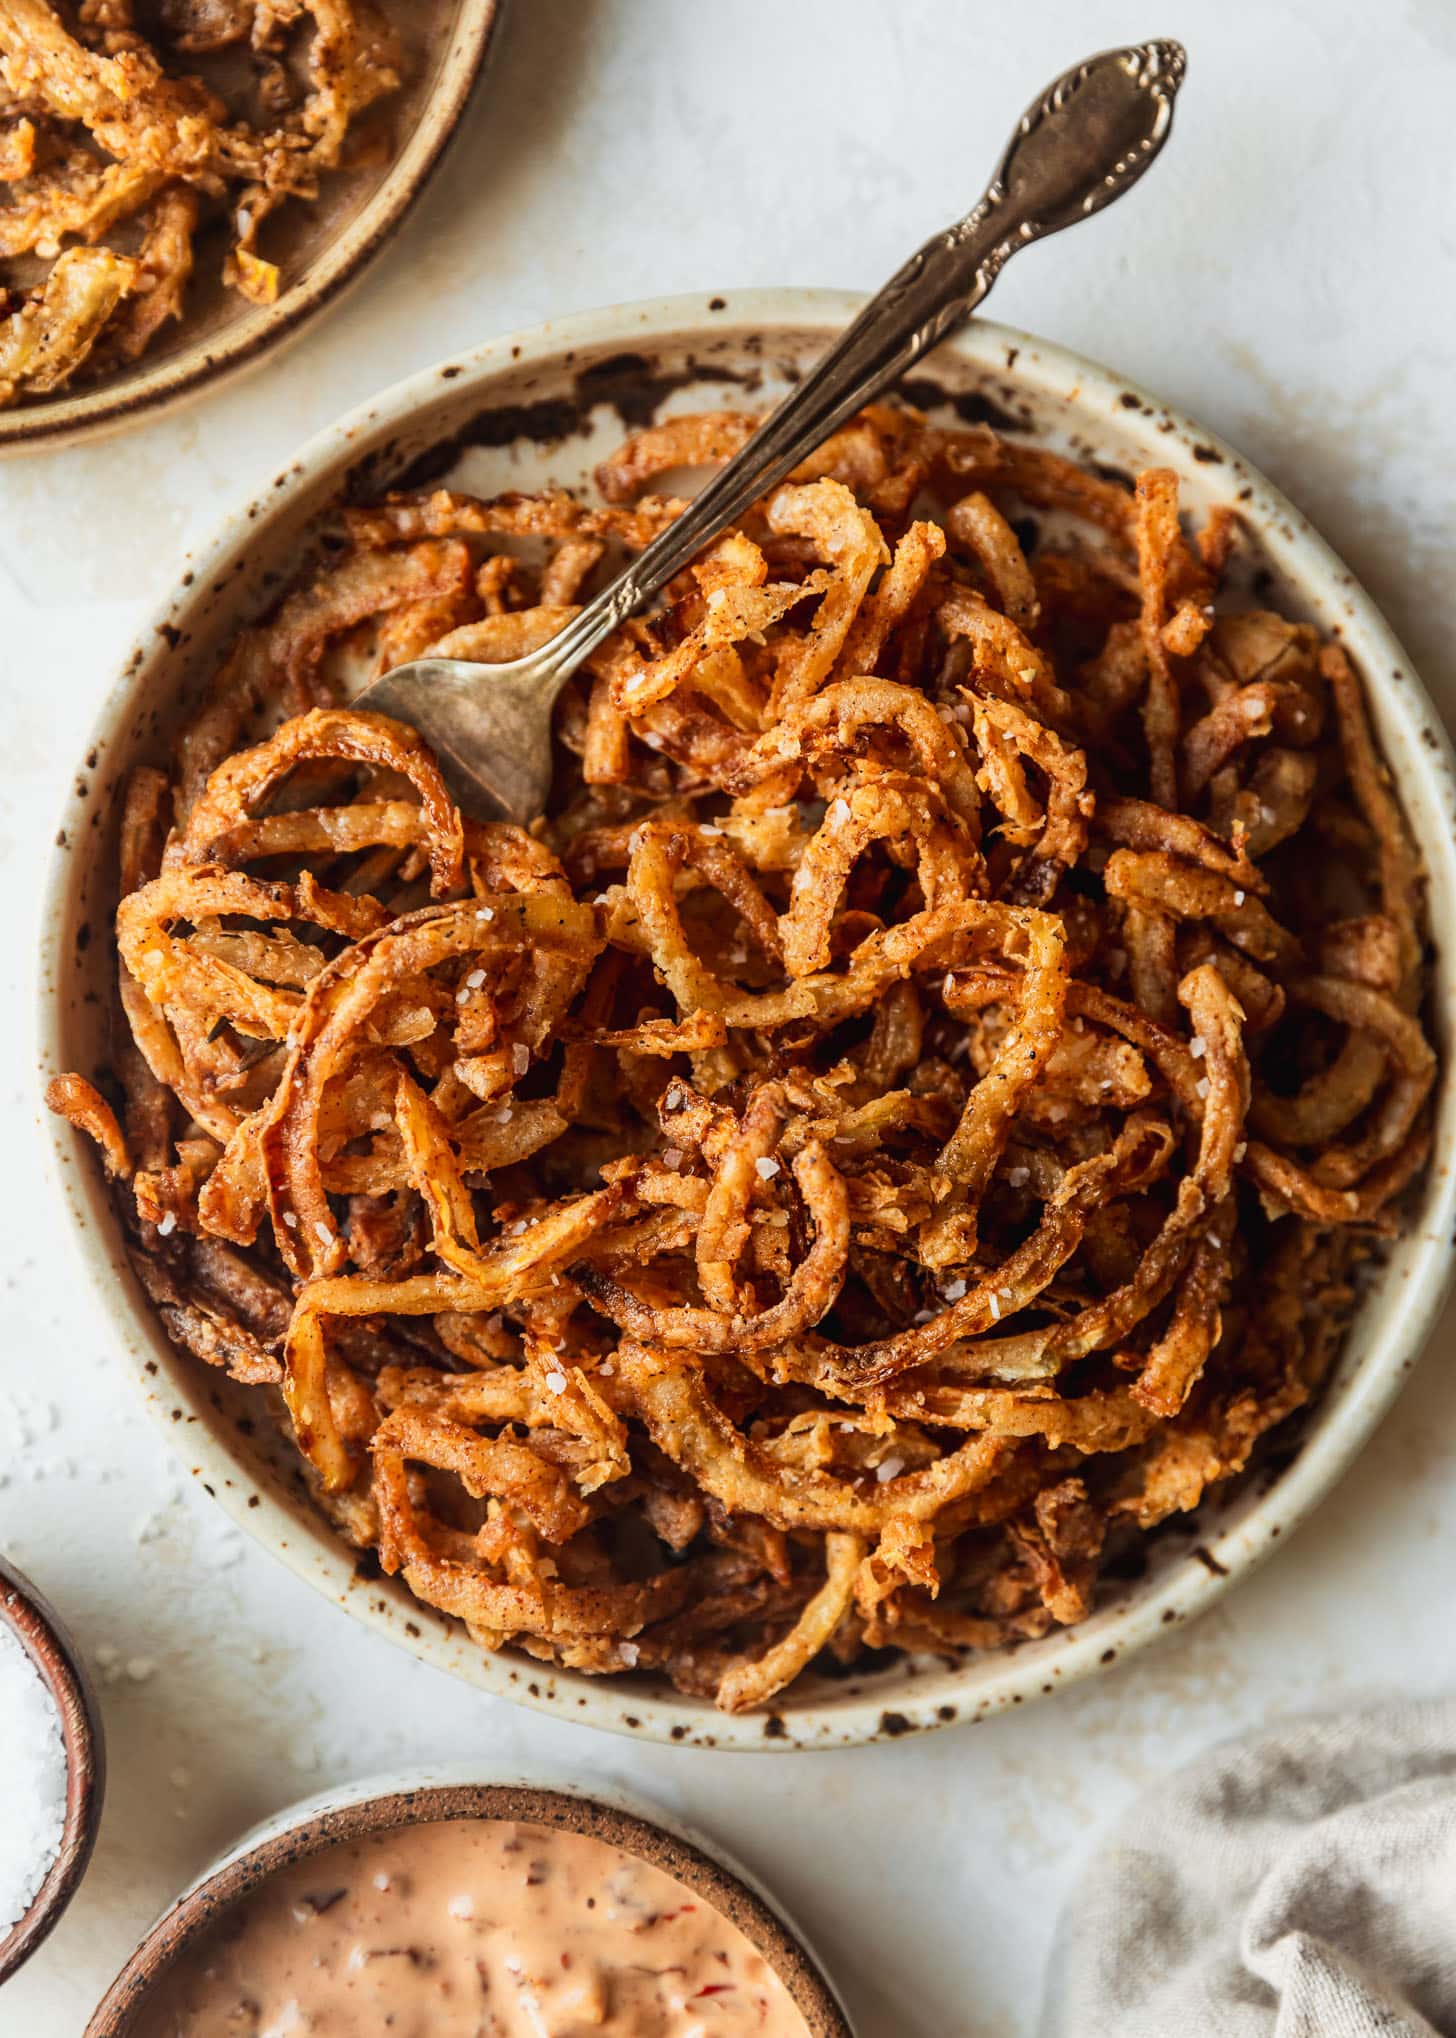 Crispy frizzled onions and a fork on white and brown speckled plate. The plate is on a beige counter next to brown bowls of salt, aioli, and onion strings.